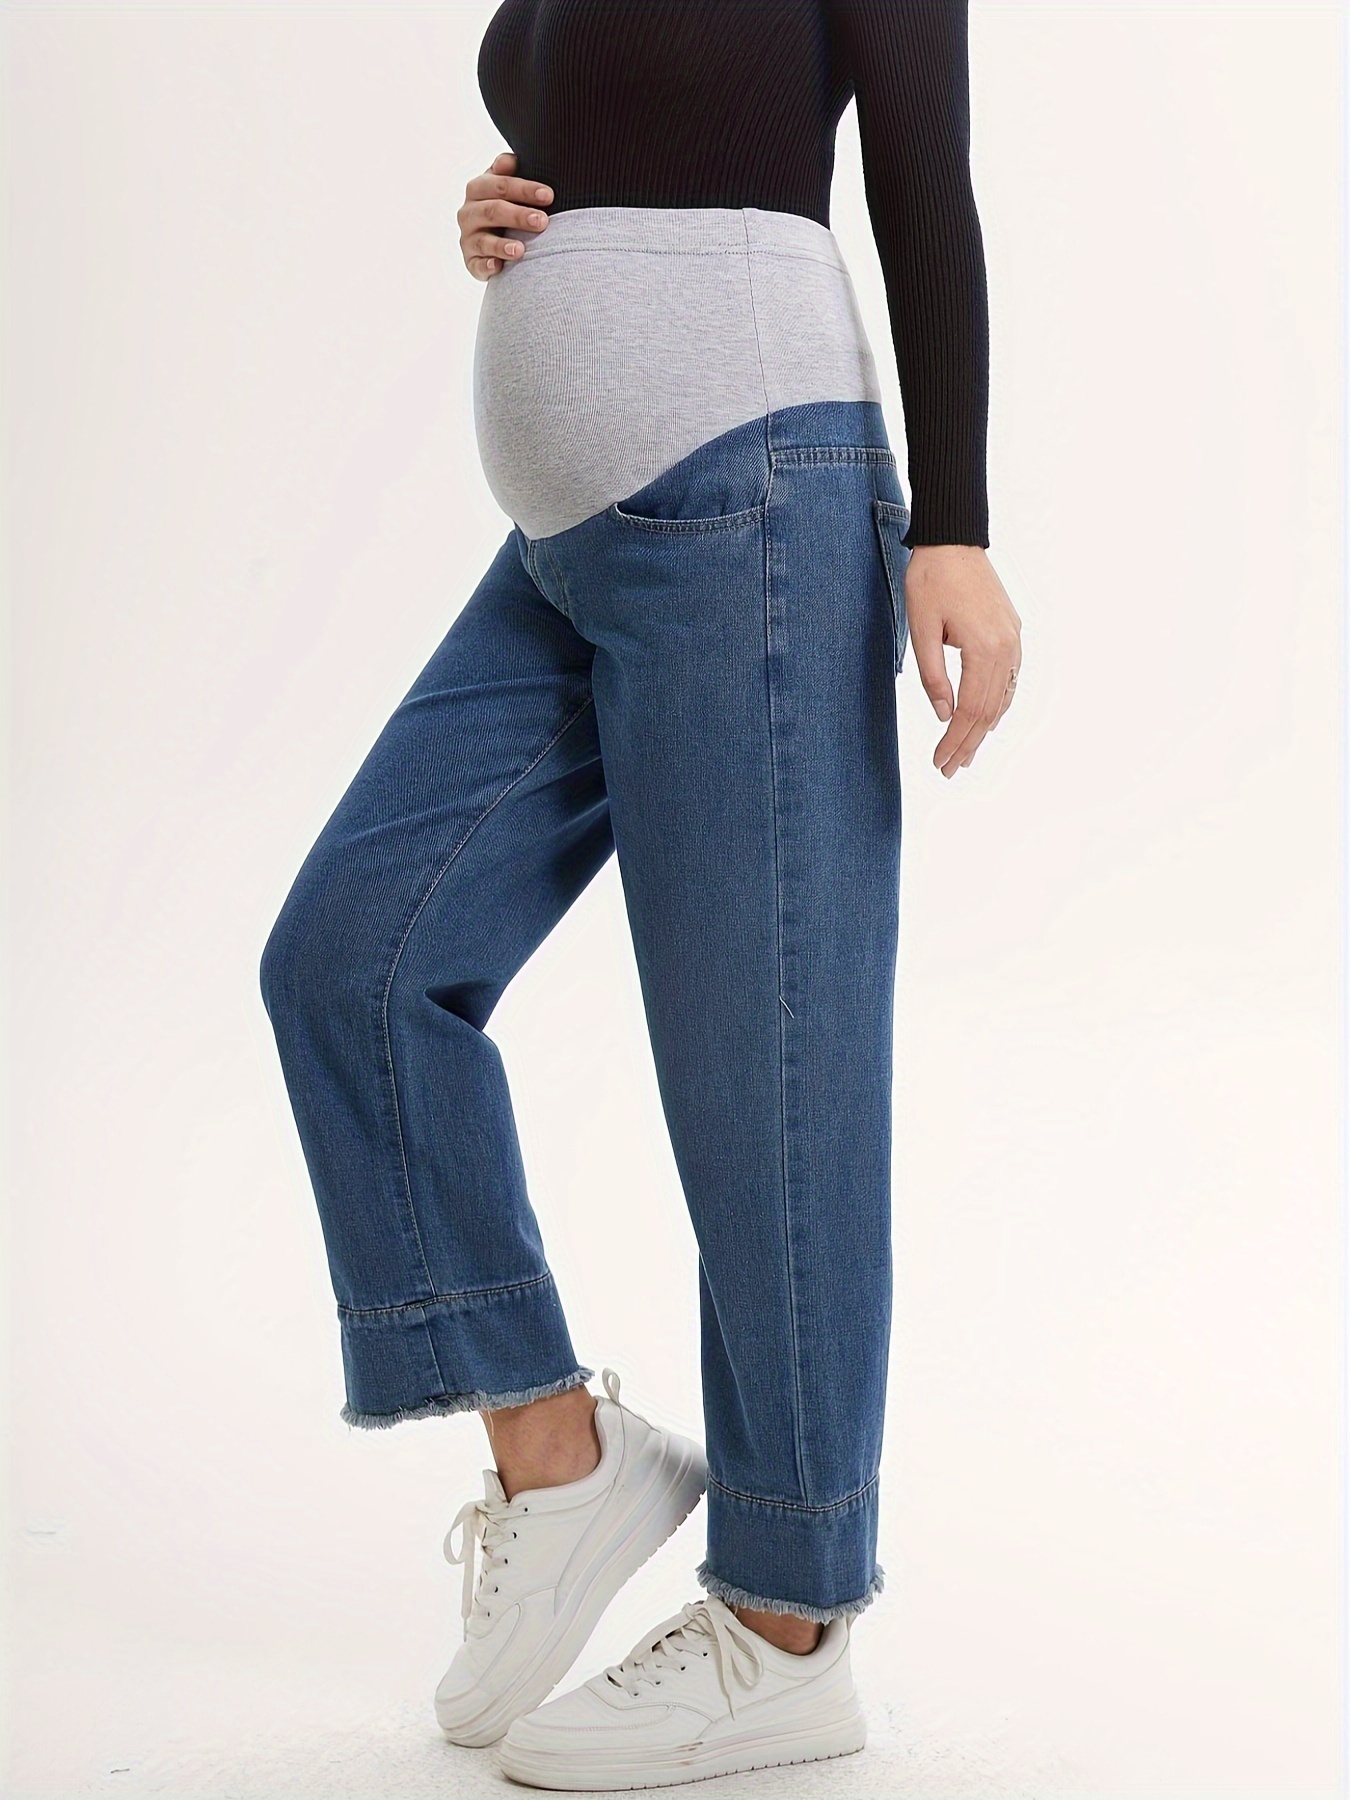 Detachable Jeans Waist Extender - Adjustable Buckle for Stretch and Comfort